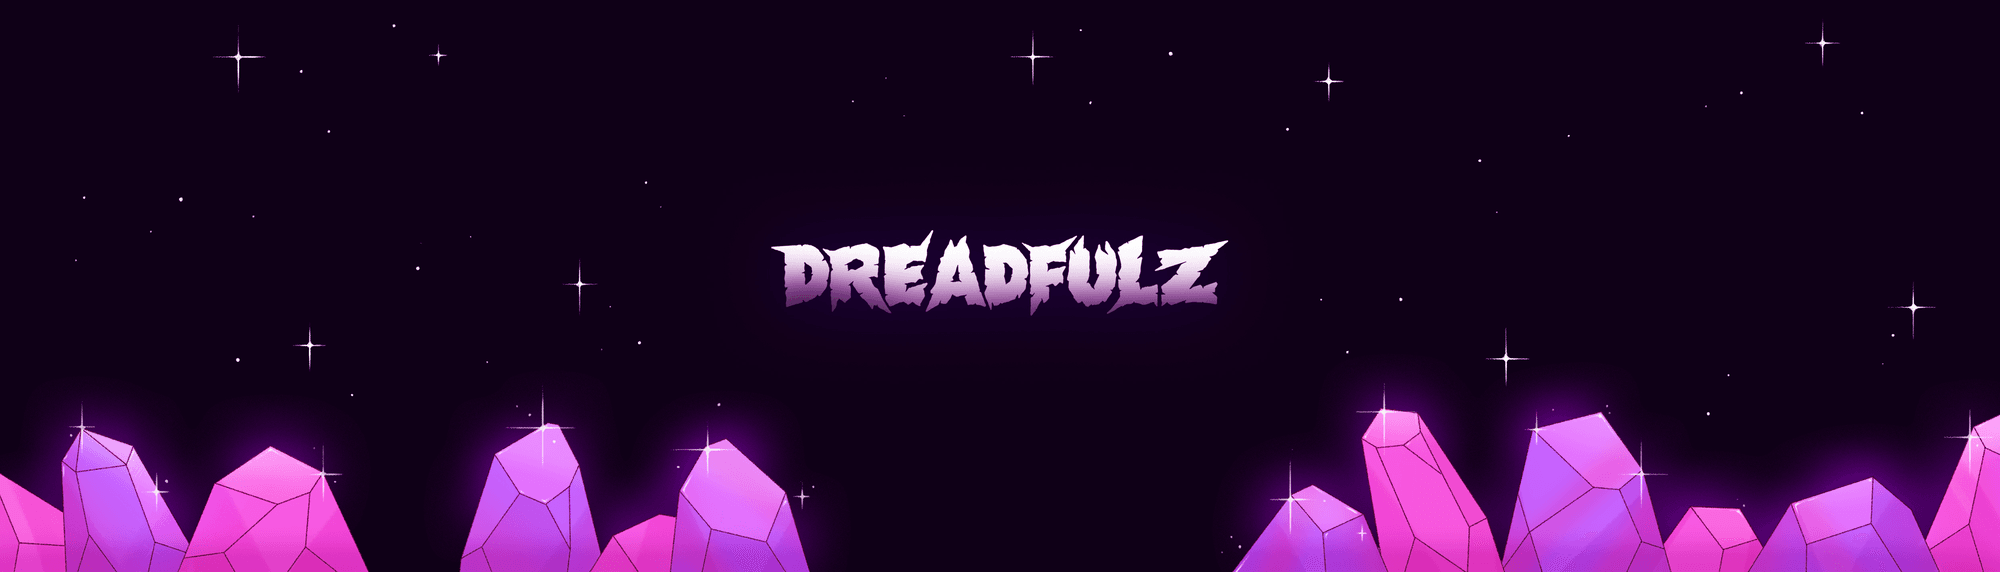 Dreadfulz NFT collection background image